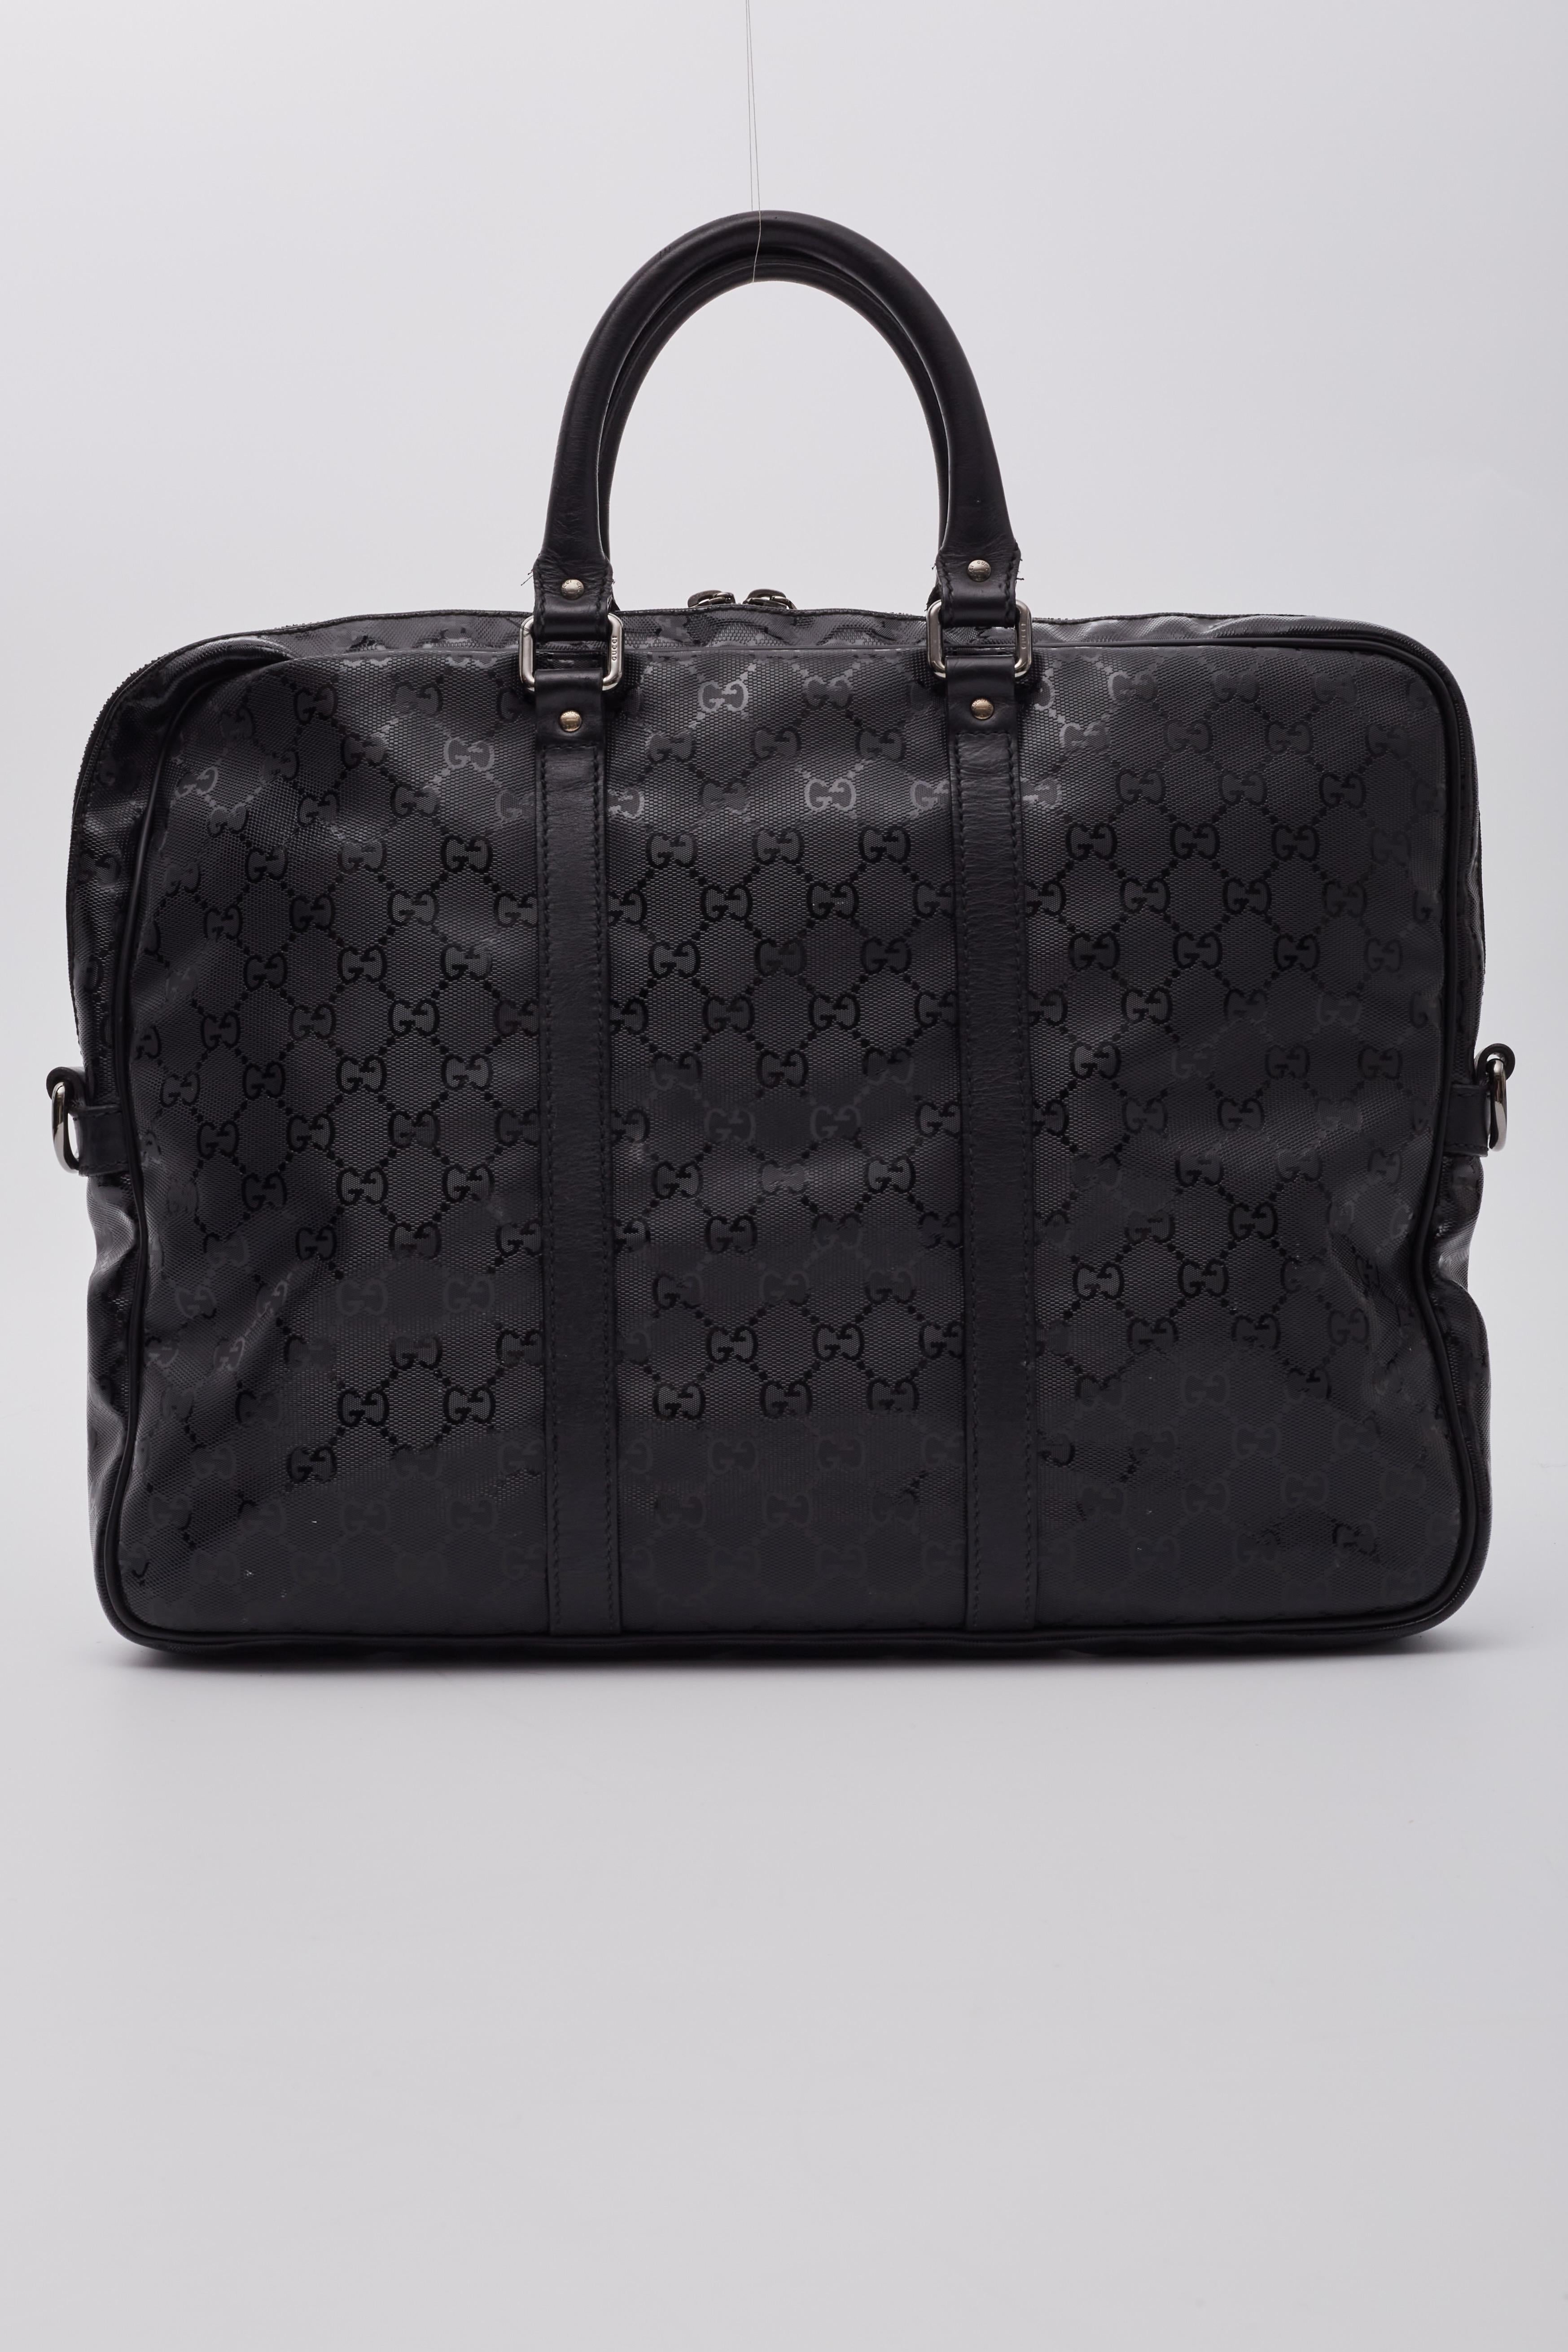 Gucci GG Imprime Canvas Black Briefcase Large In Good Condition For Sale In Montreal, Quebec